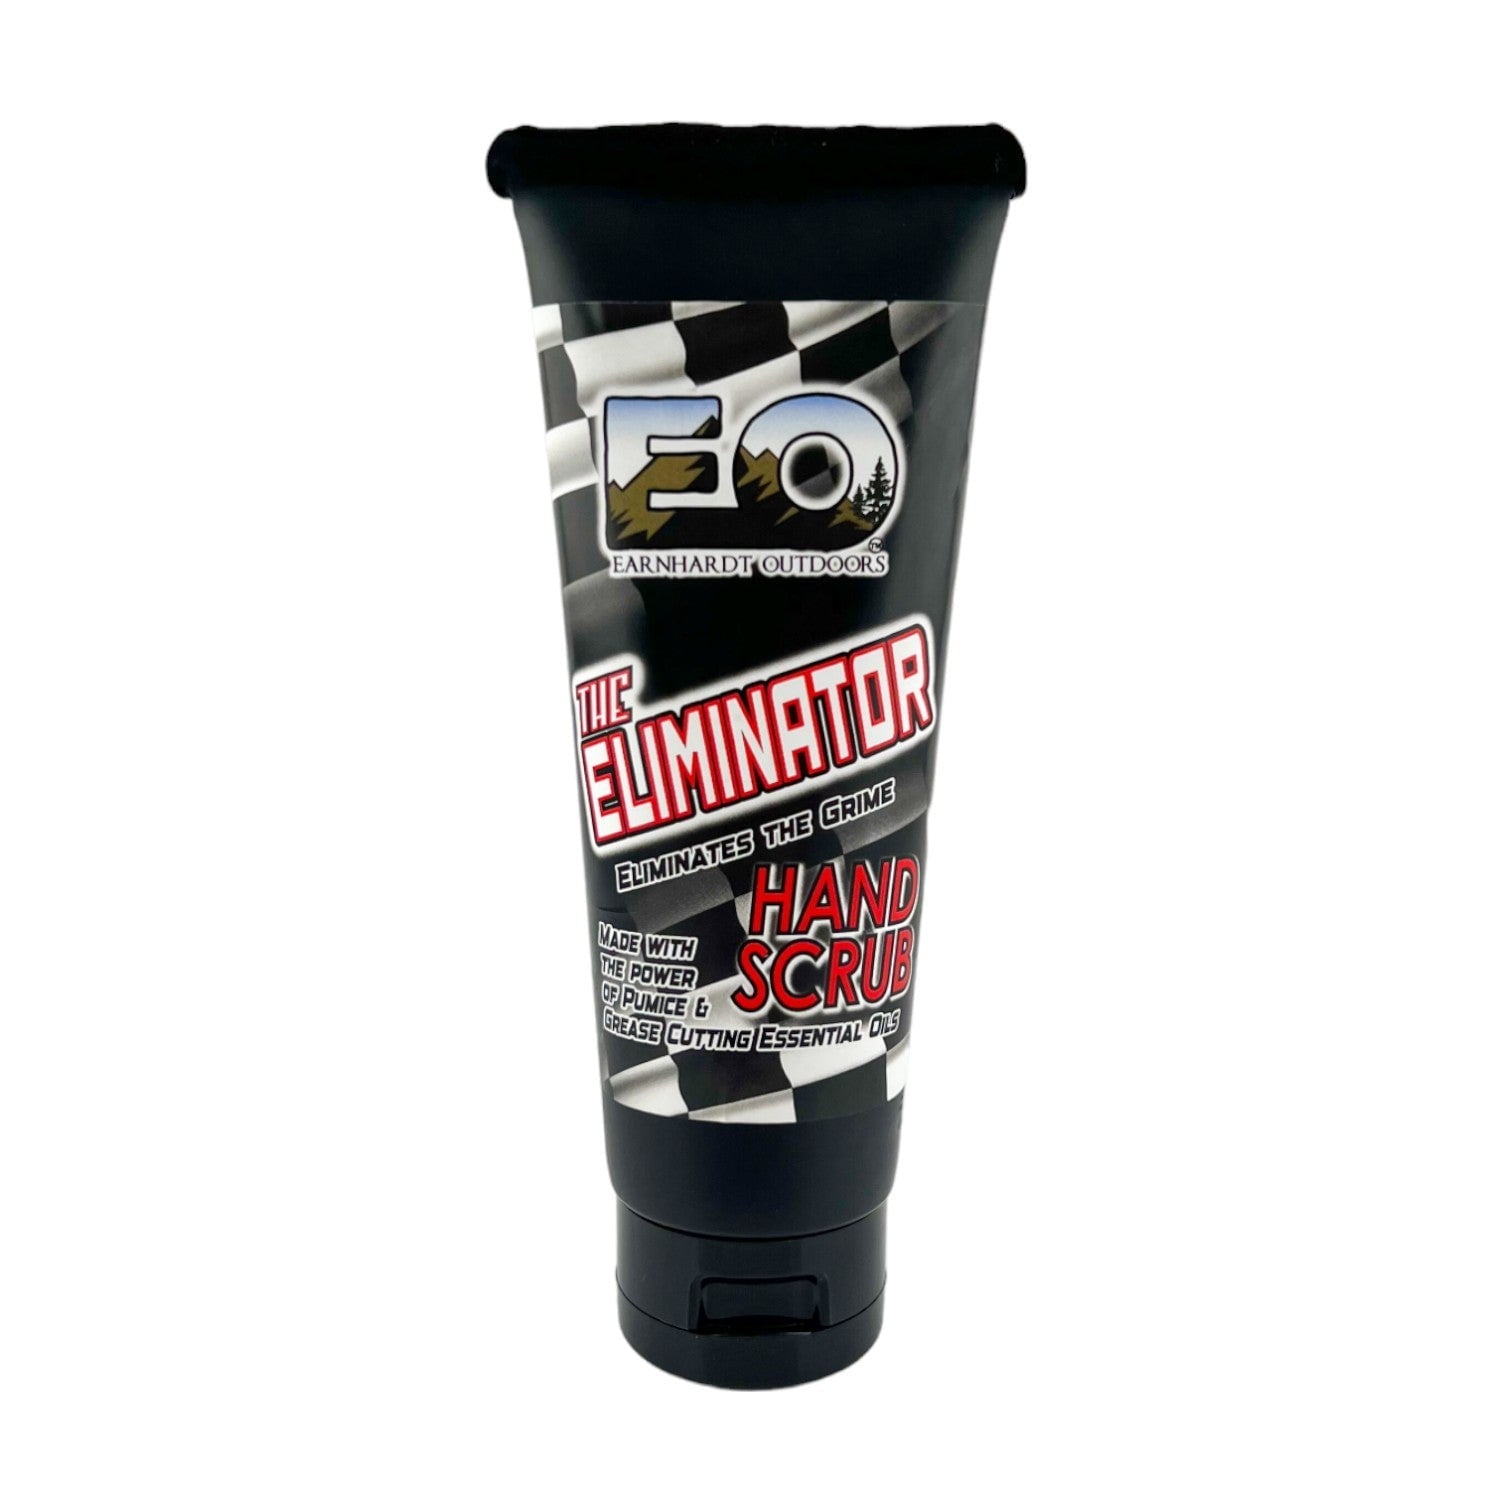 The Eliminator Scrub Earnhardt Outdoors - Old Town Soap Co.